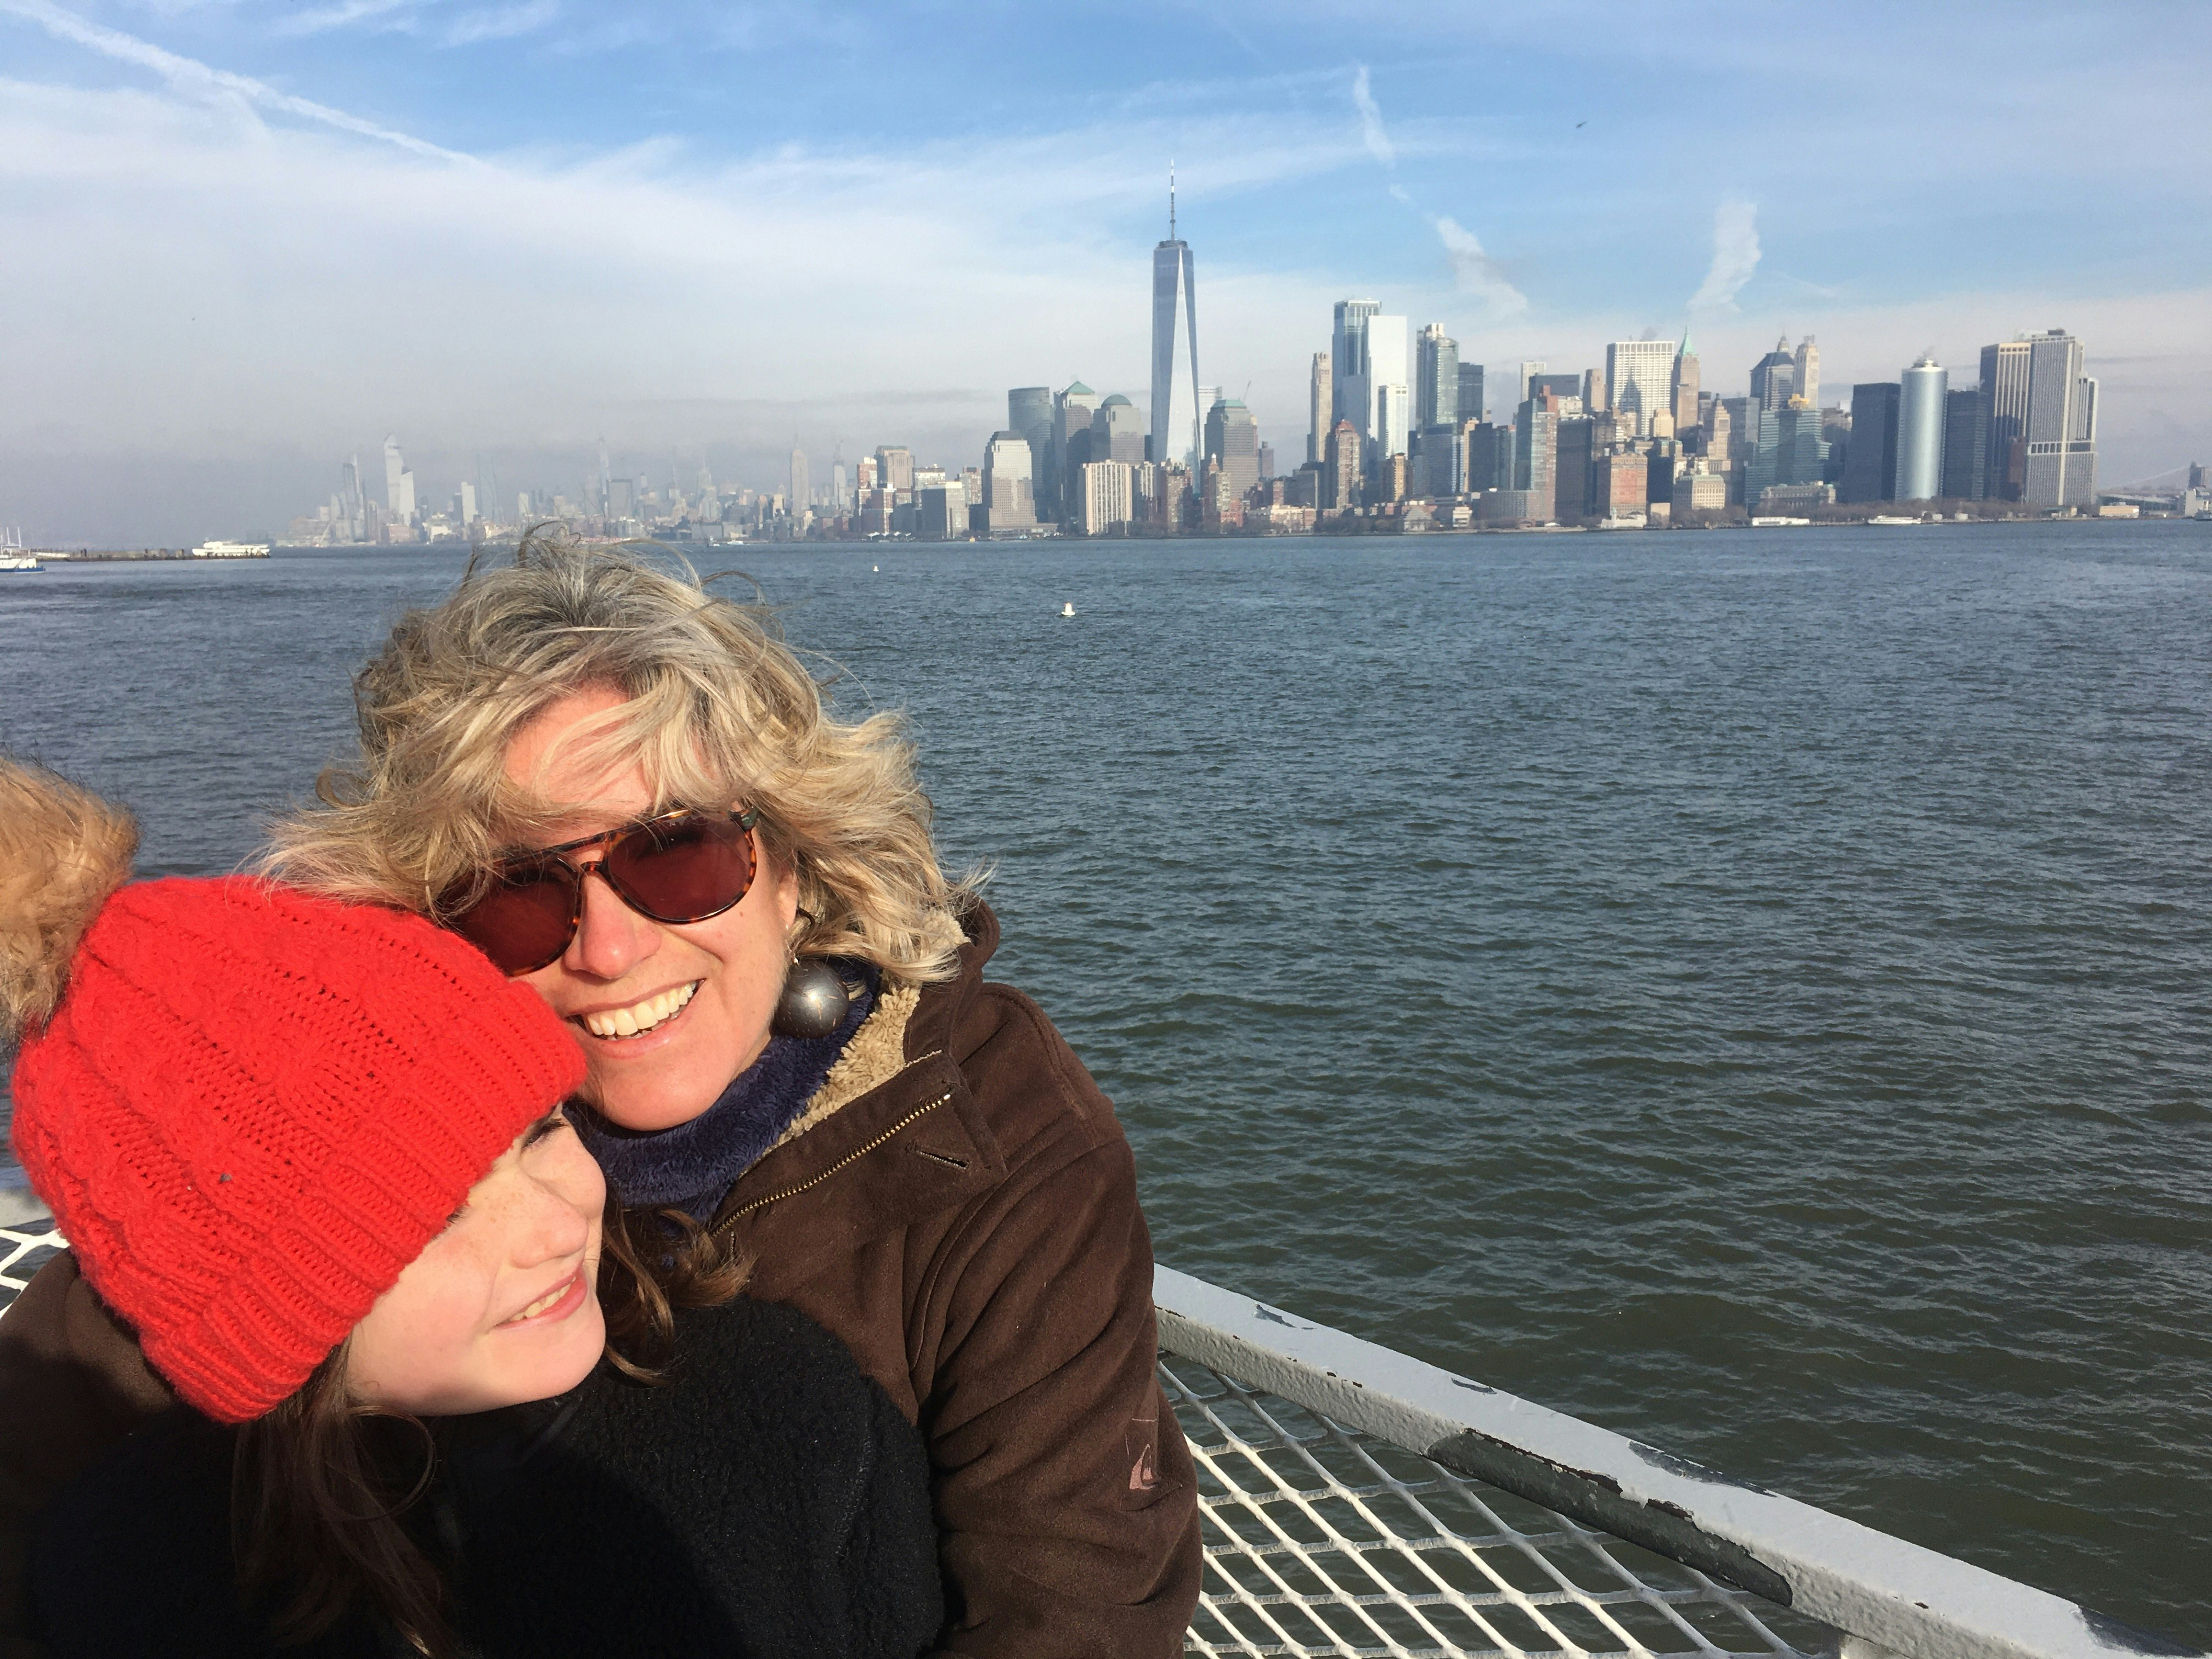 Tasmin Waby with one of her daughters on a boat. The New York City skyline is visible in the background.